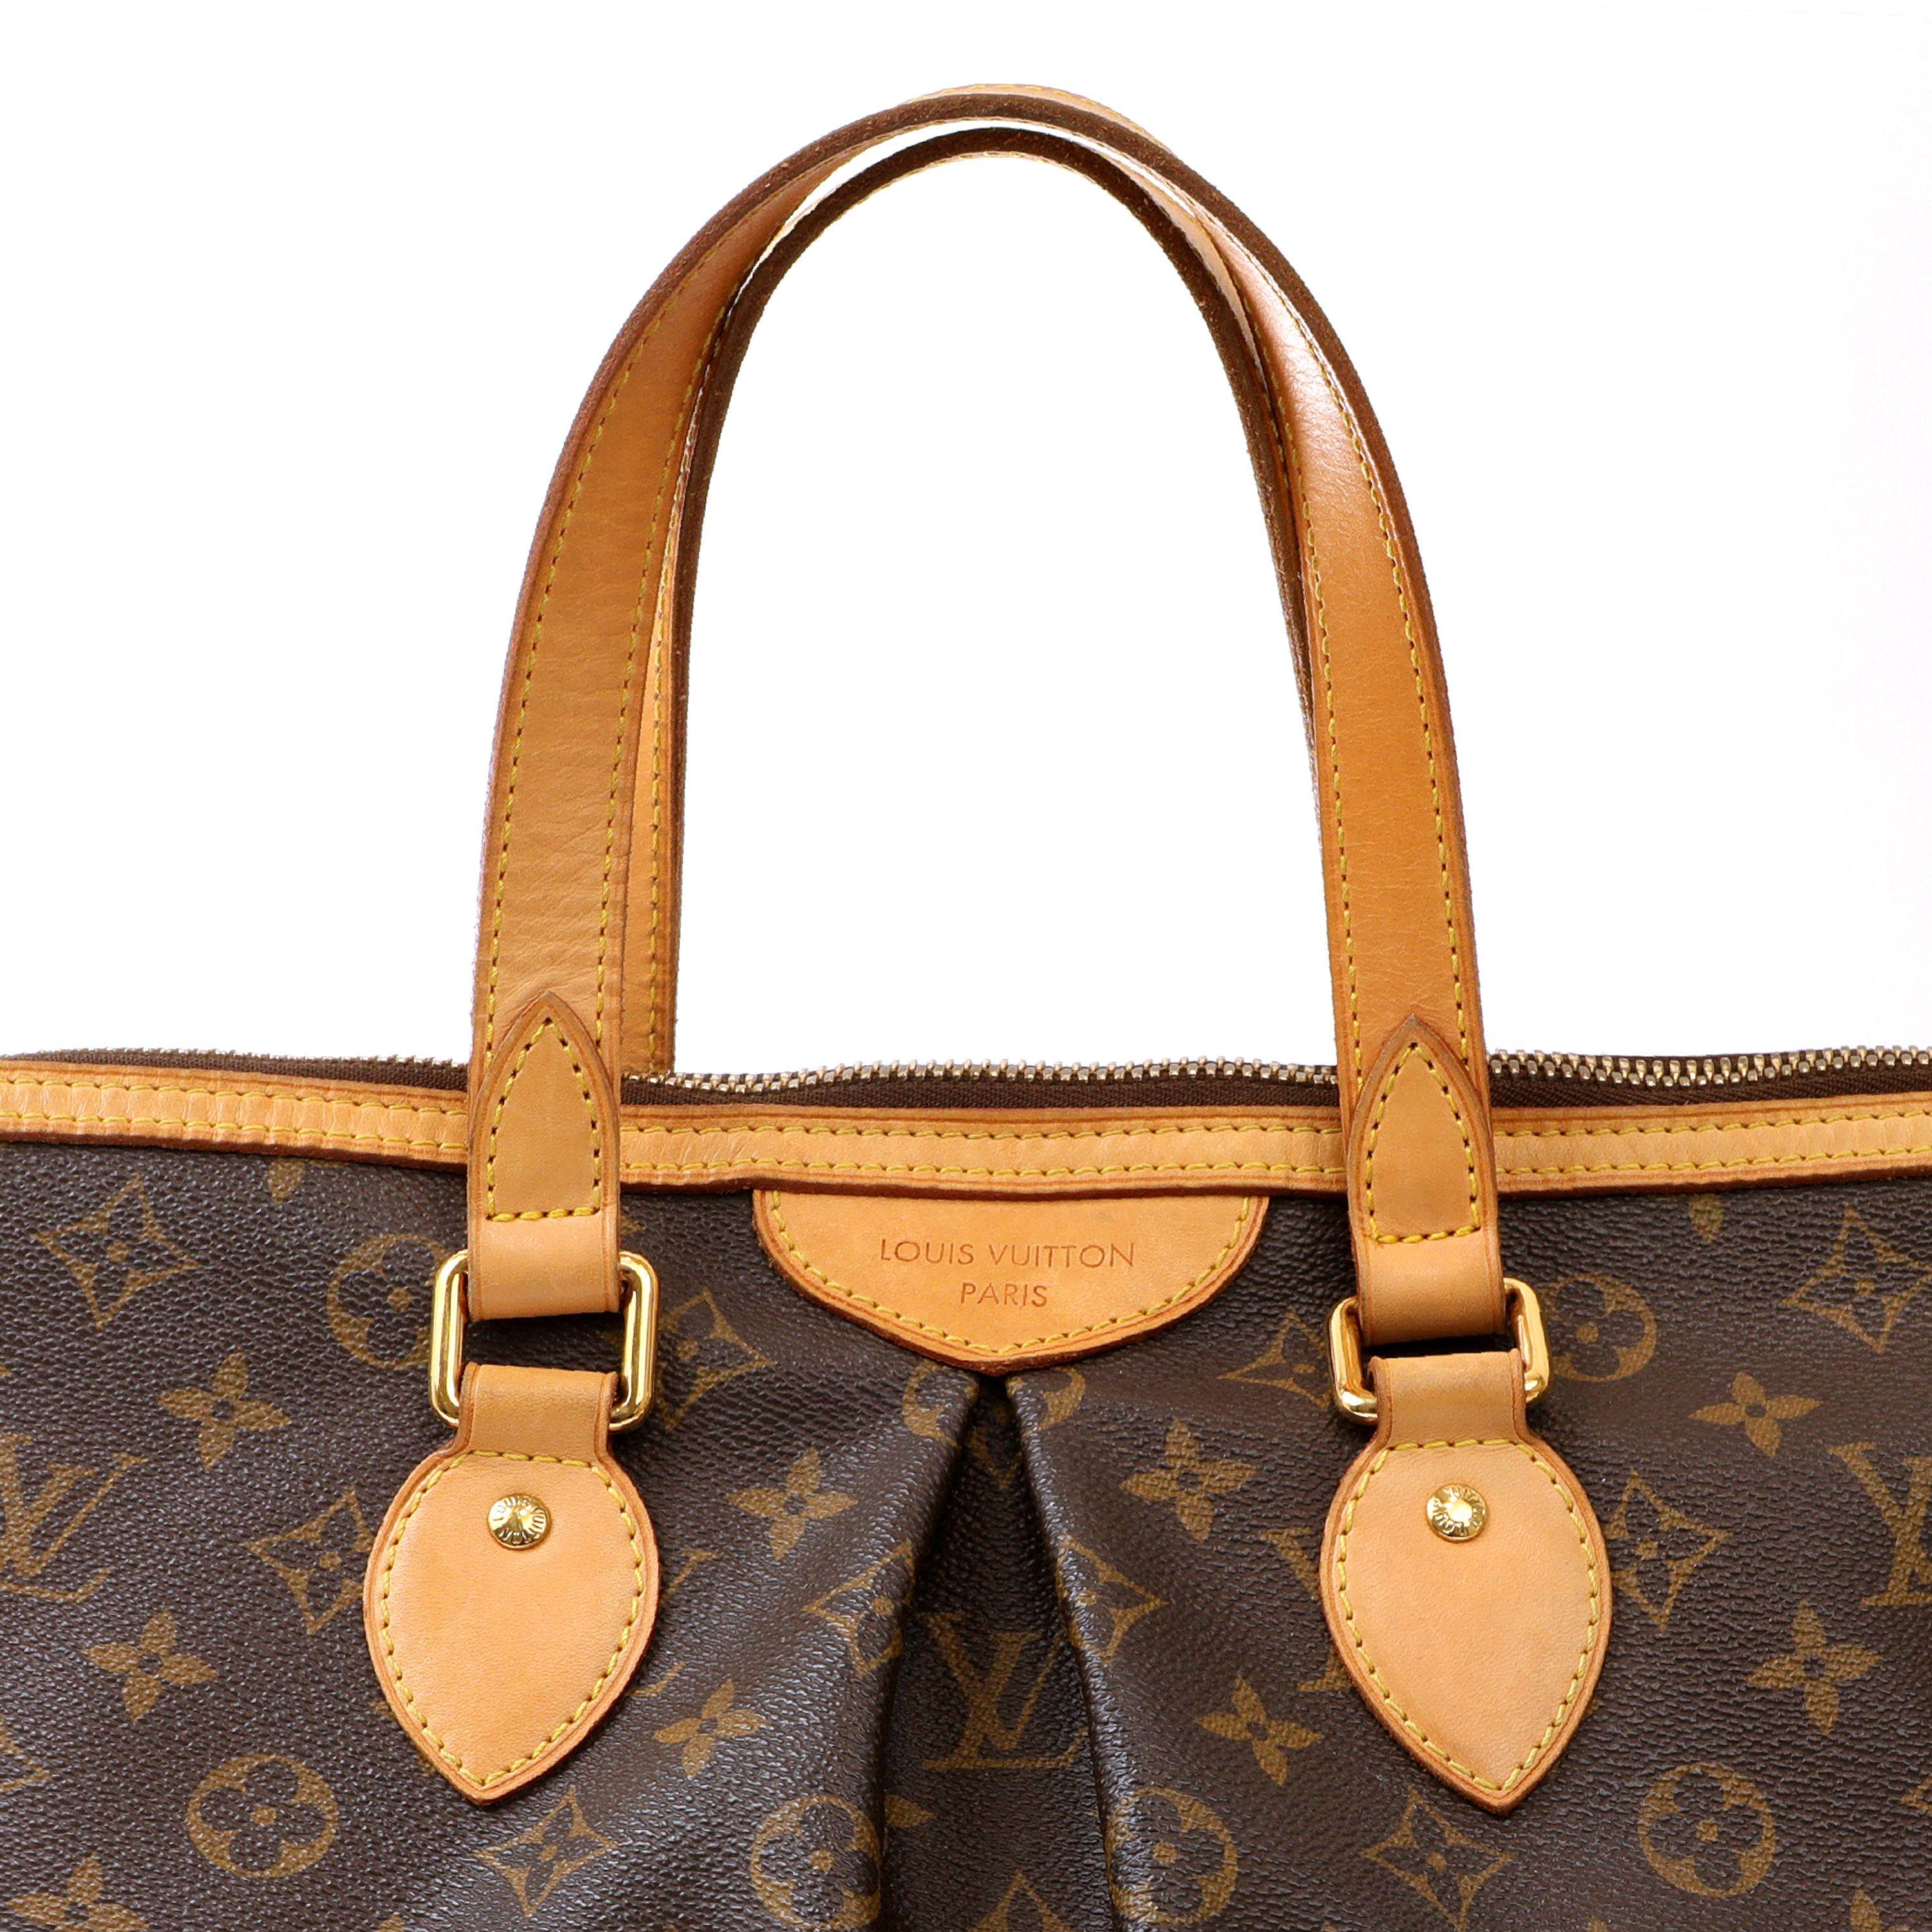 This authentic Louis Vuitton Monogram Palermo PM Tote is in excellent condition.  Signature brown and tan LV monogram with natural vachetta leather trim and straps.  Pleated detail, zippered top and detachable shoulder strap.    

PBF 13922
 
